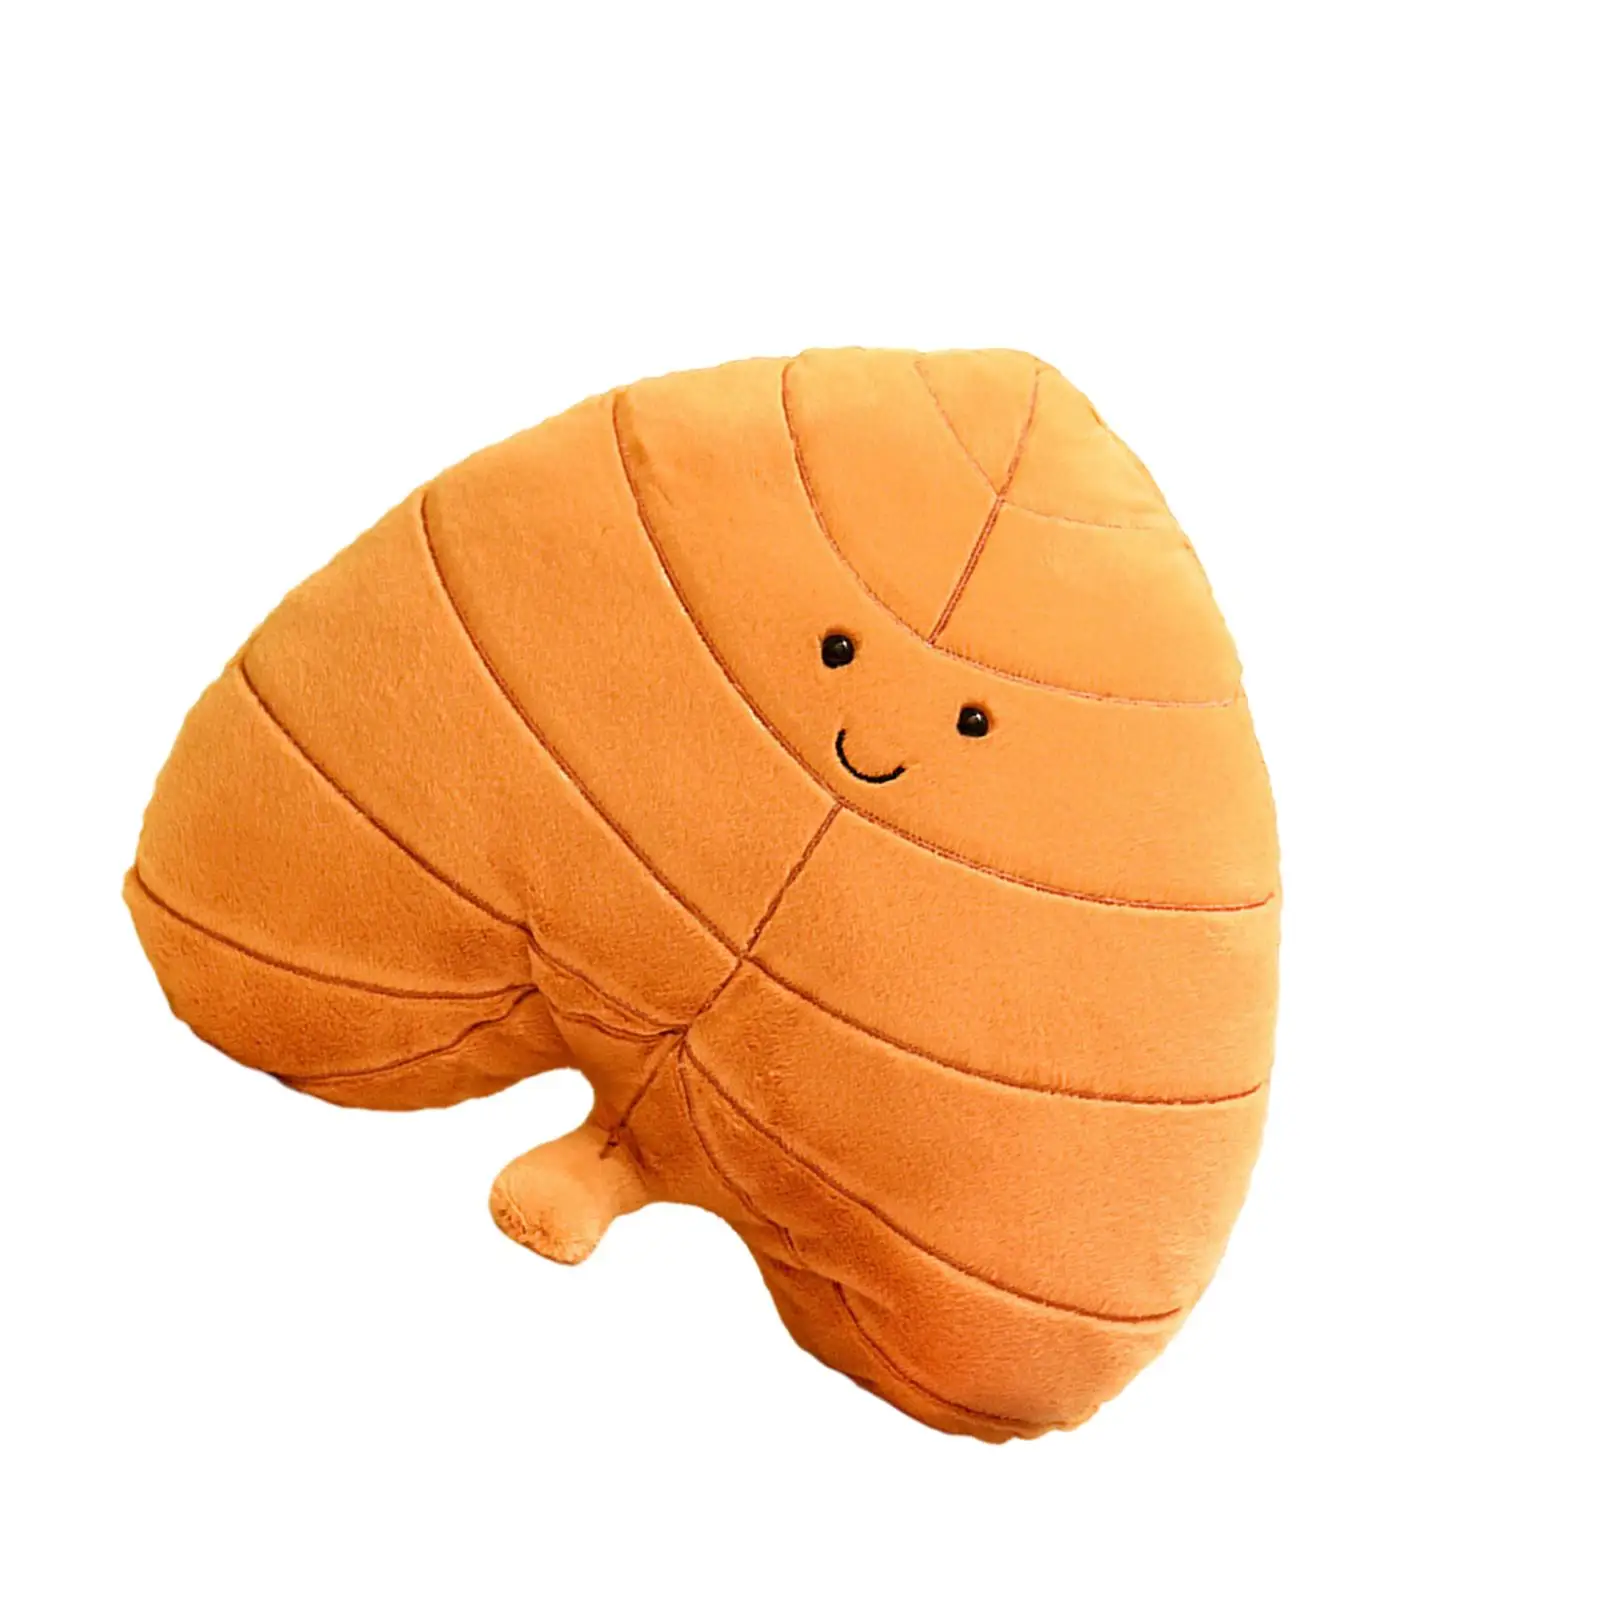 3D Leaf Plush Pillow Creative Soft Cute Decorative Throw Pillow Plush Toy Backrest Pillow for Couch Bed Bedroom Sofa Home Decor